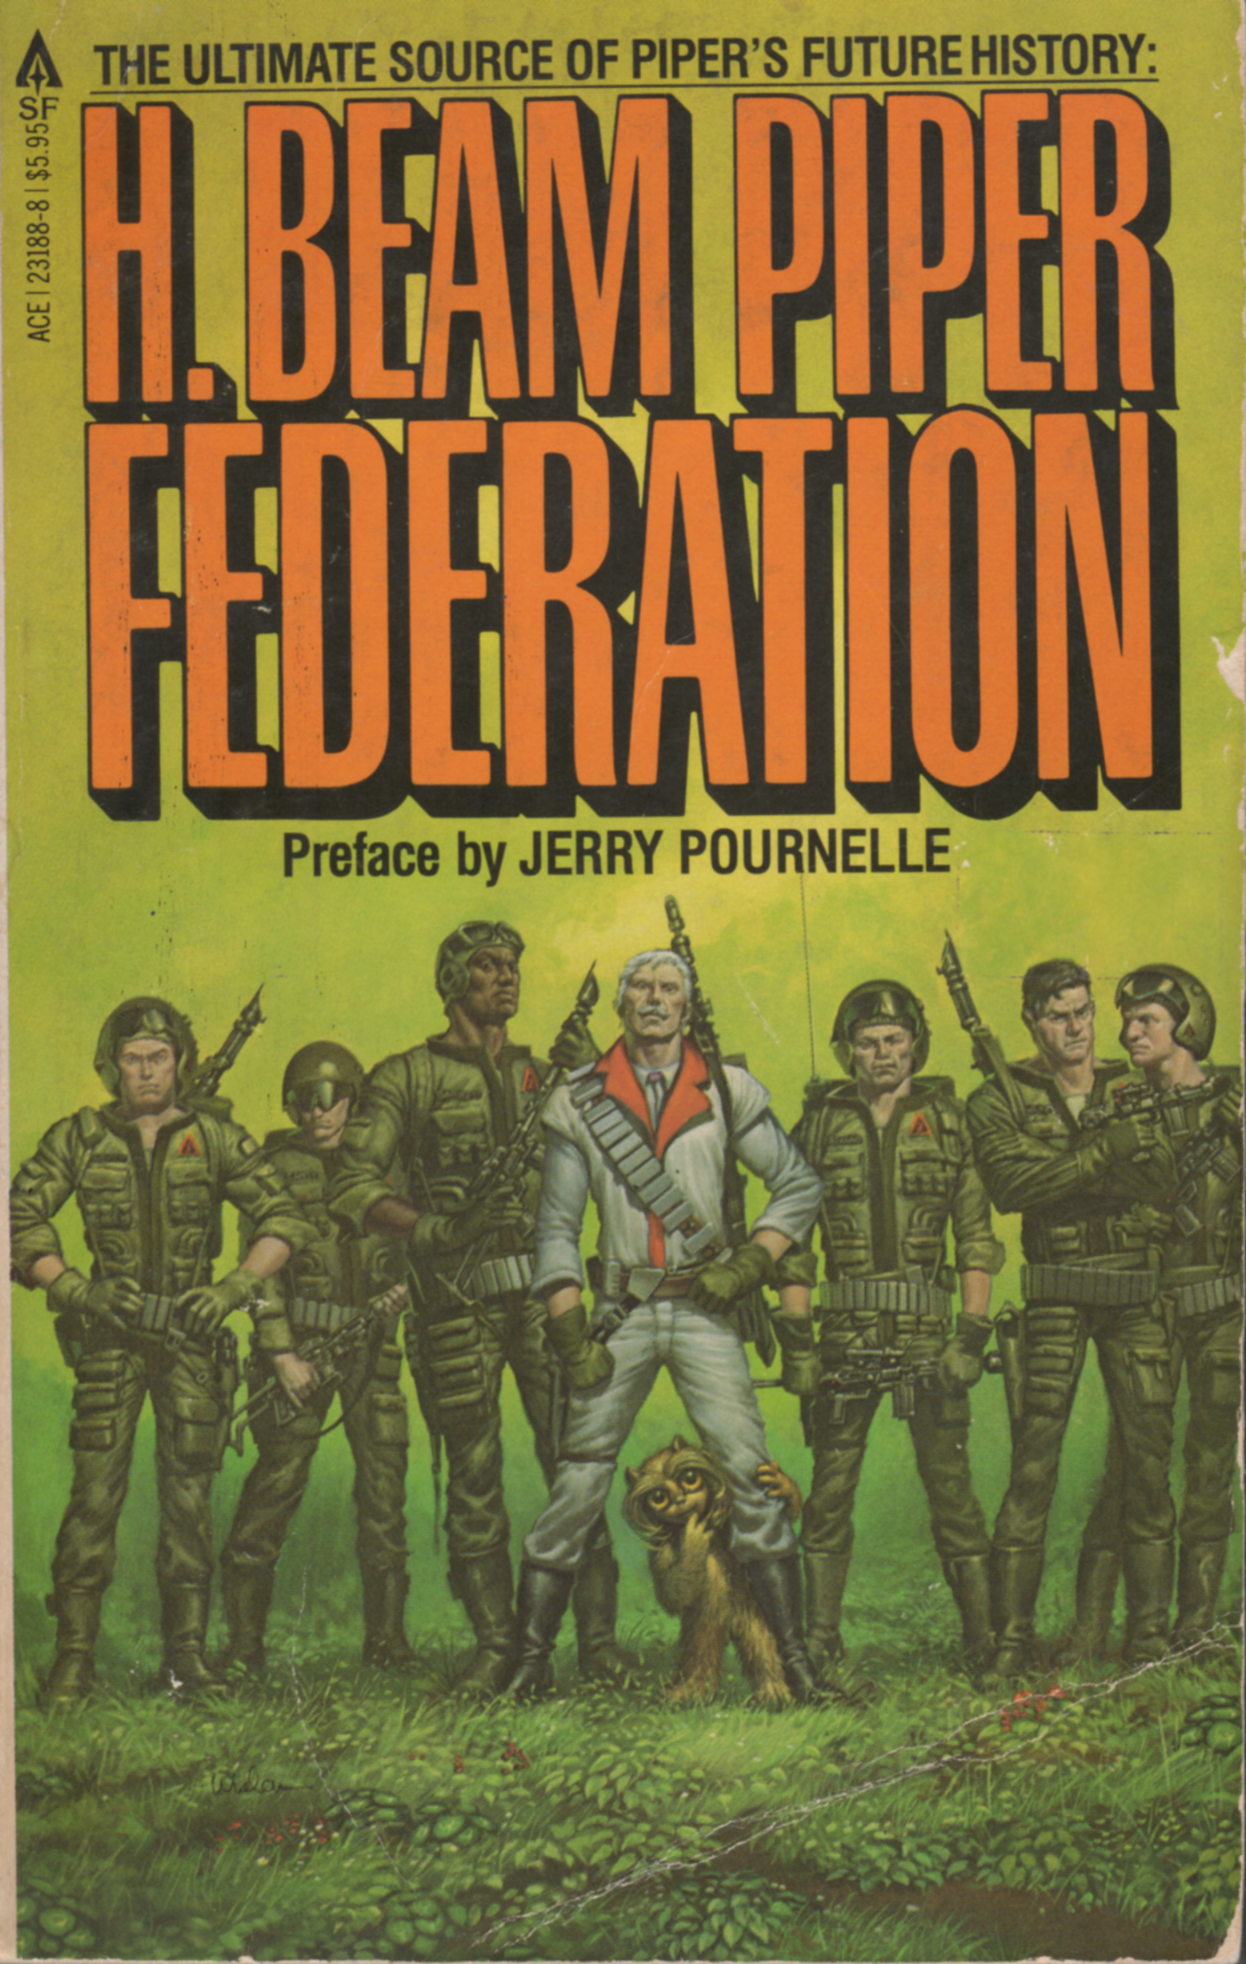 Image - Federation by H. Beam Piper